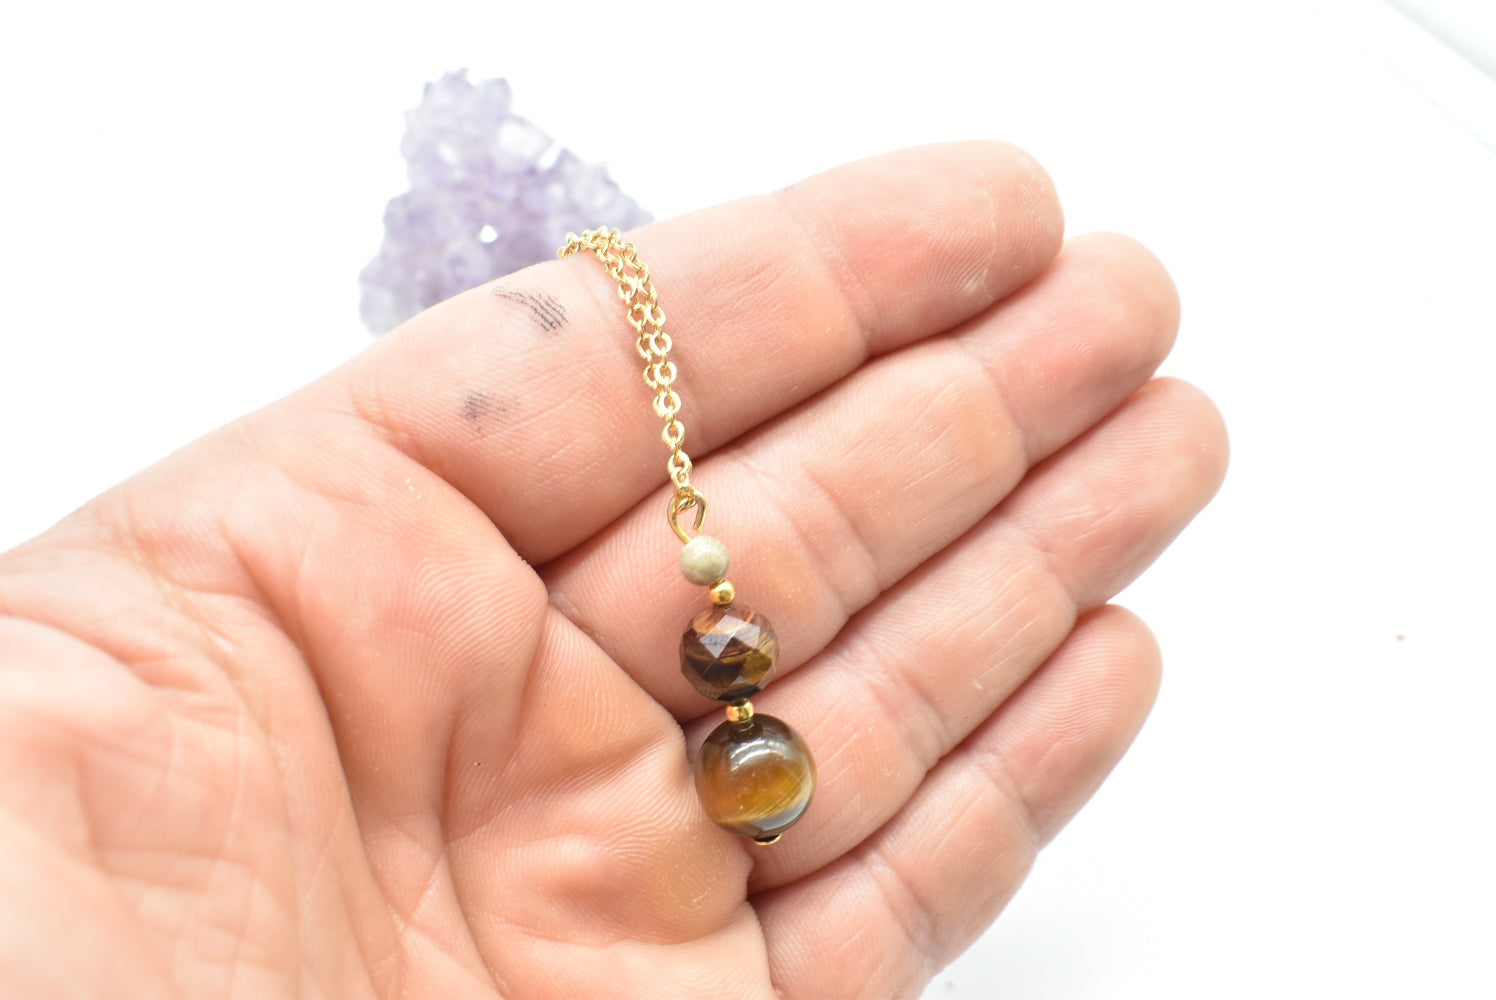 Tiger's Eye and Moonstone beads pendant